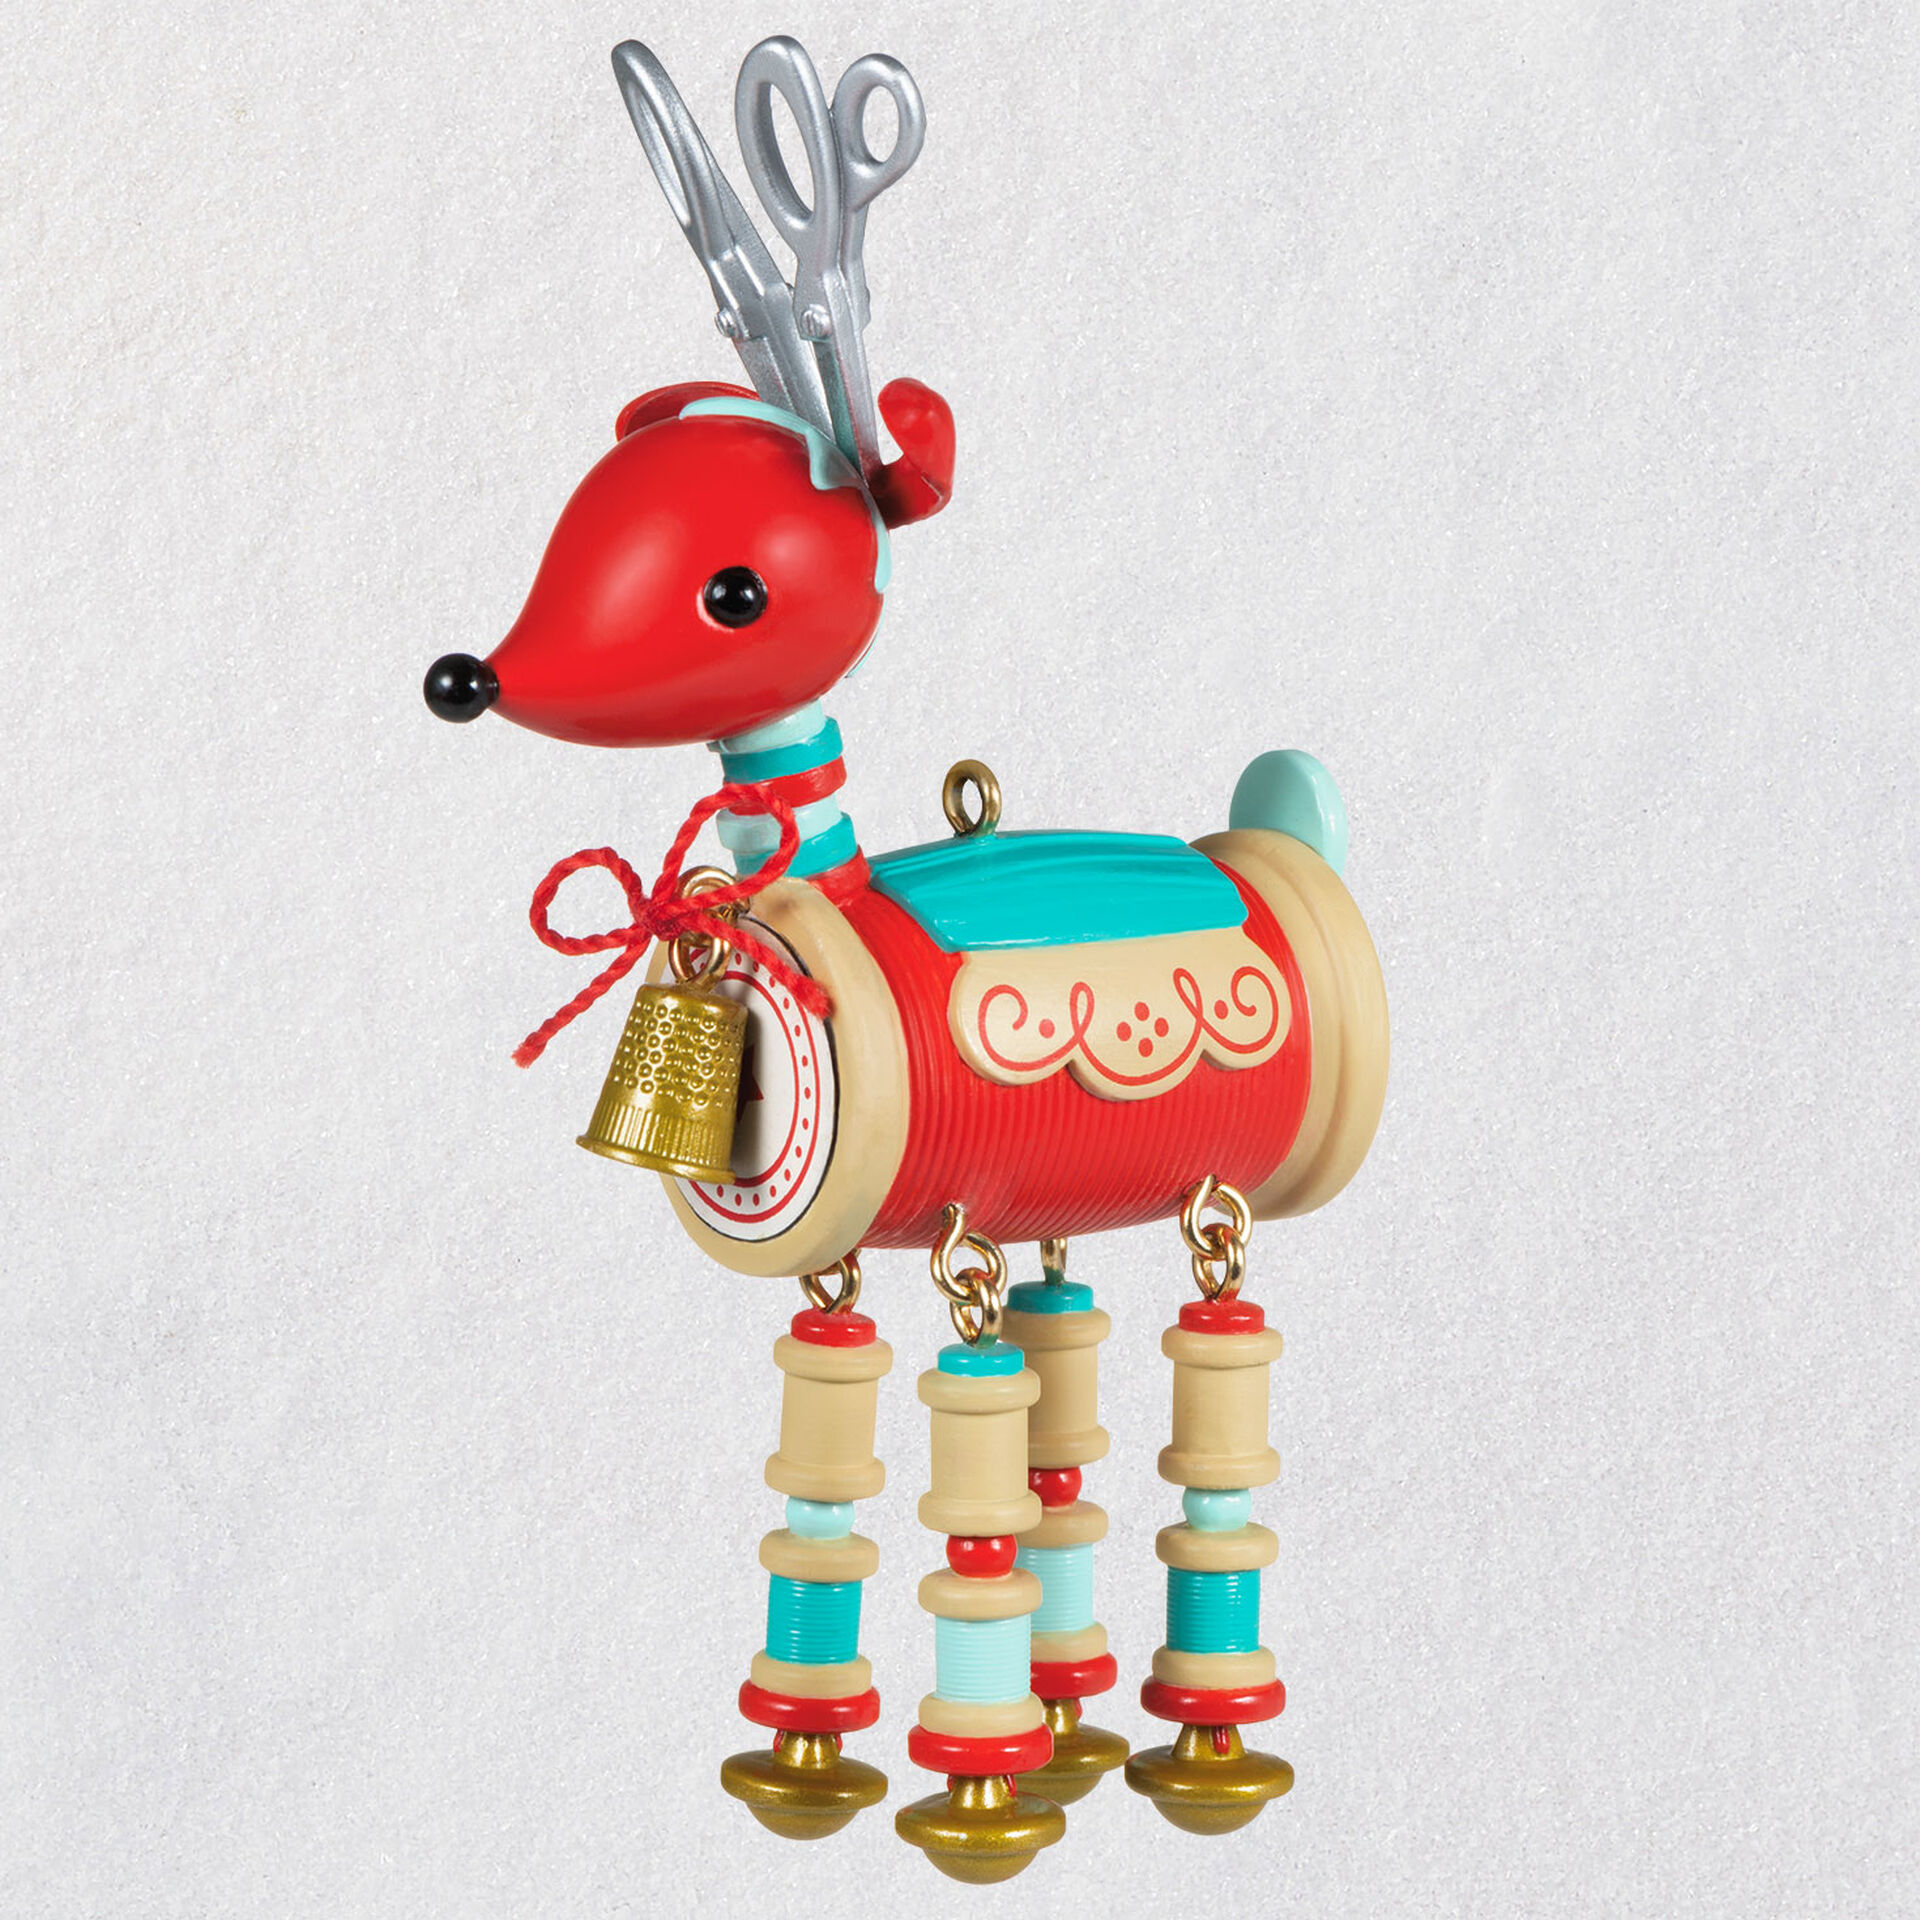 Sew Darn Cute! Sewing Reindeer 2020 Ornament - Occasions Hallmark Gifts and More